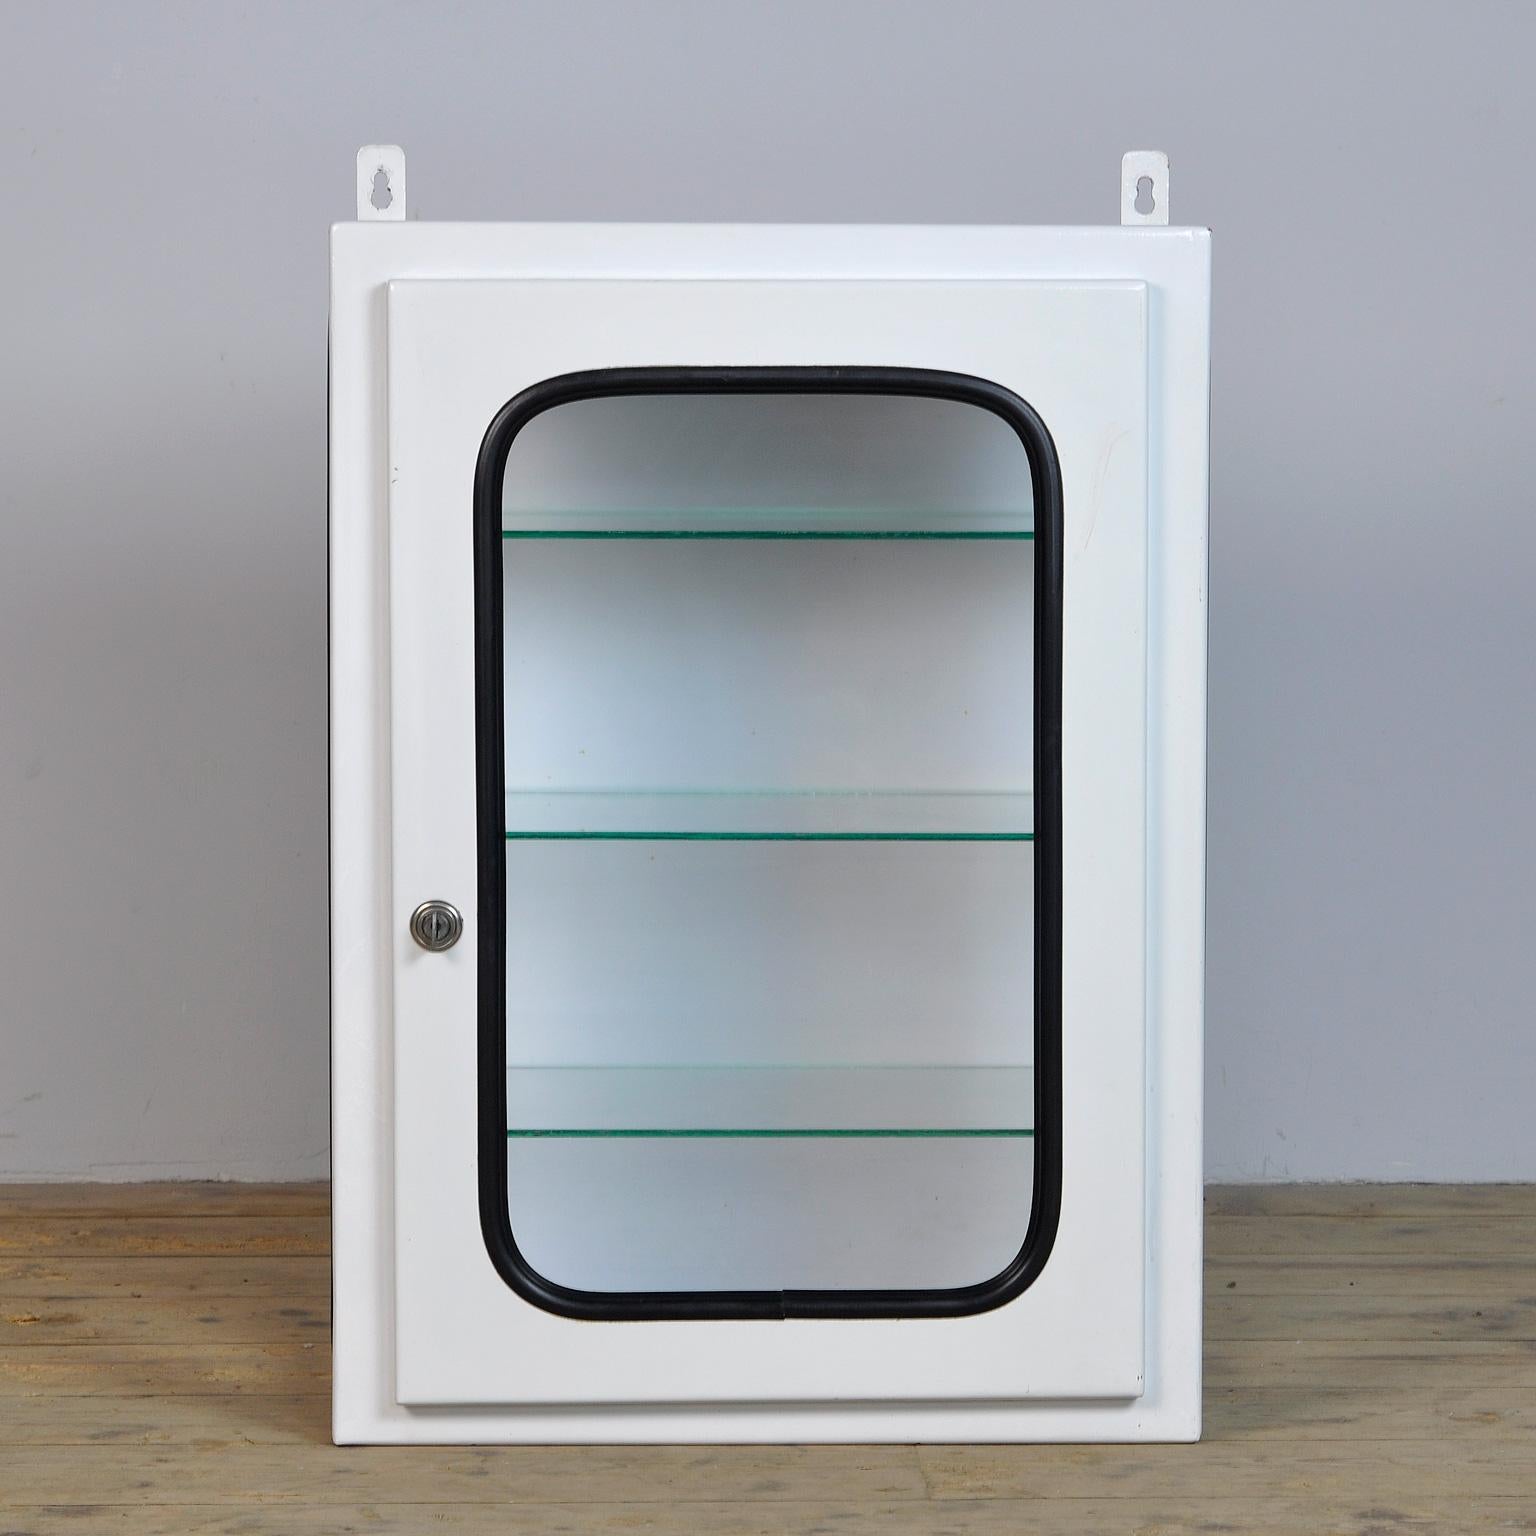 This medicine cabinet was designed in the 1970s and produced circa 1975 in Hungary. It is made of iron and glass and is held by a black rubber strip. The cabinet comes with three adjustable glass shelves.